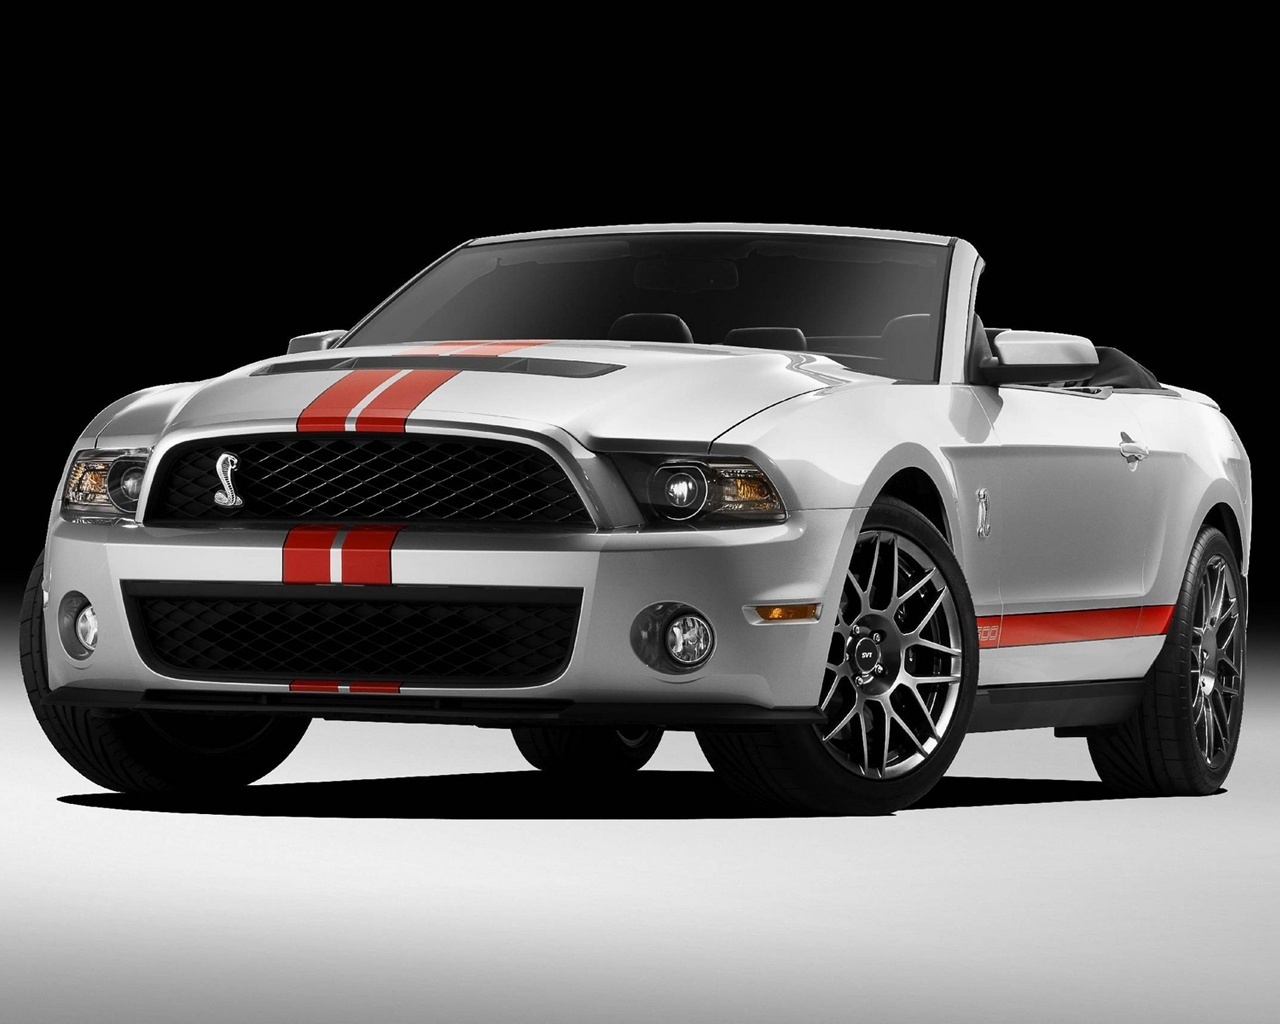 Ford Shelby GT500 Convertible 2010 for 1280 x 1024 resolution